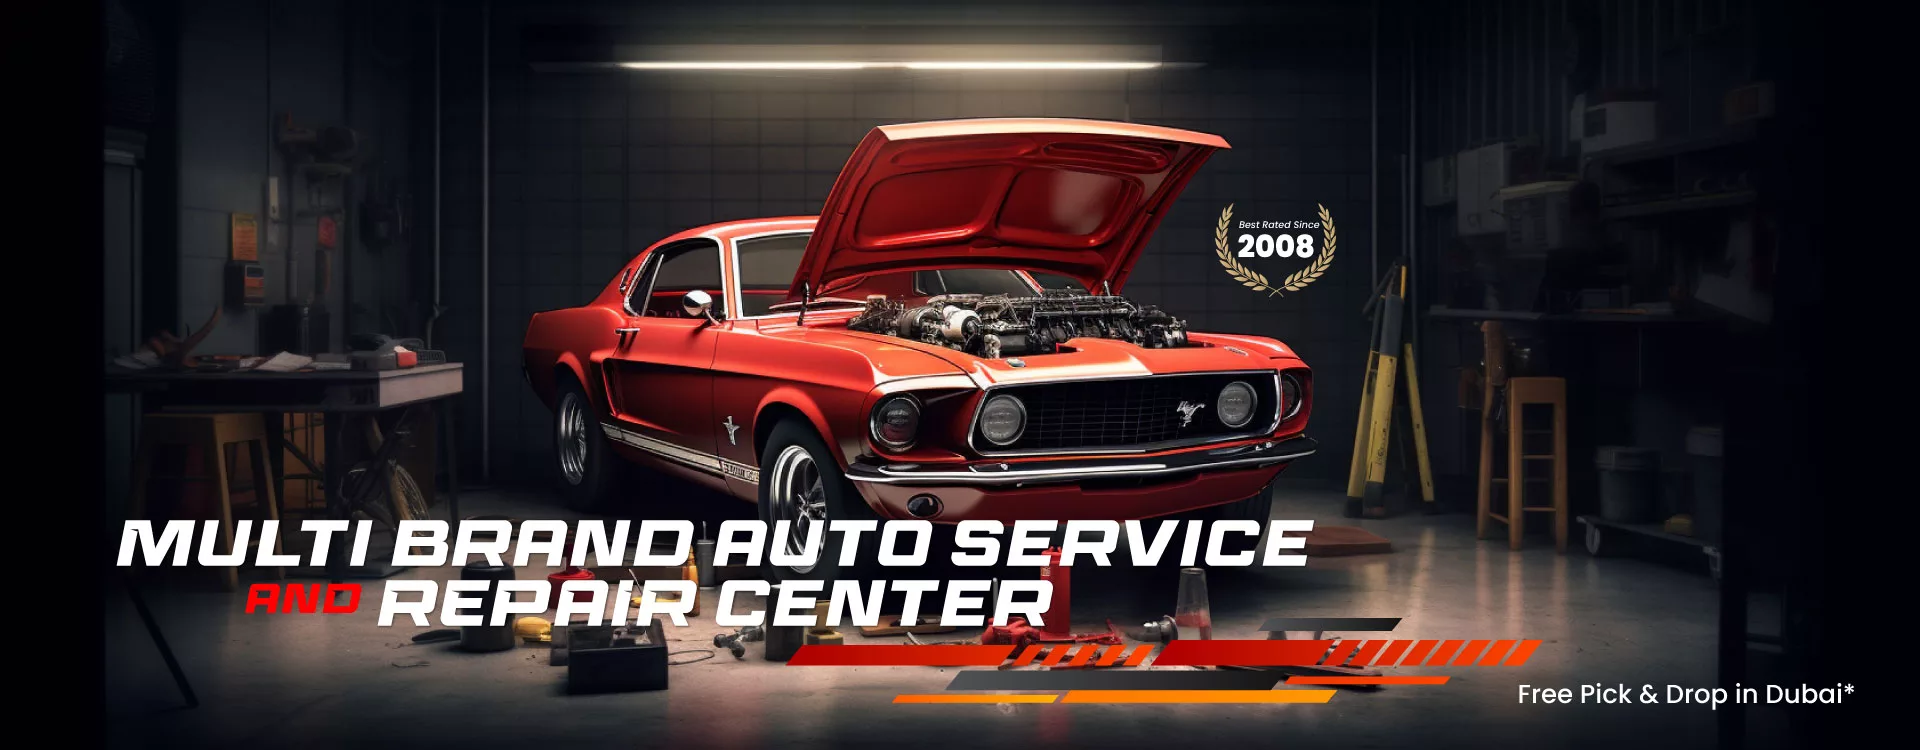 Best rated Car Services and Repair